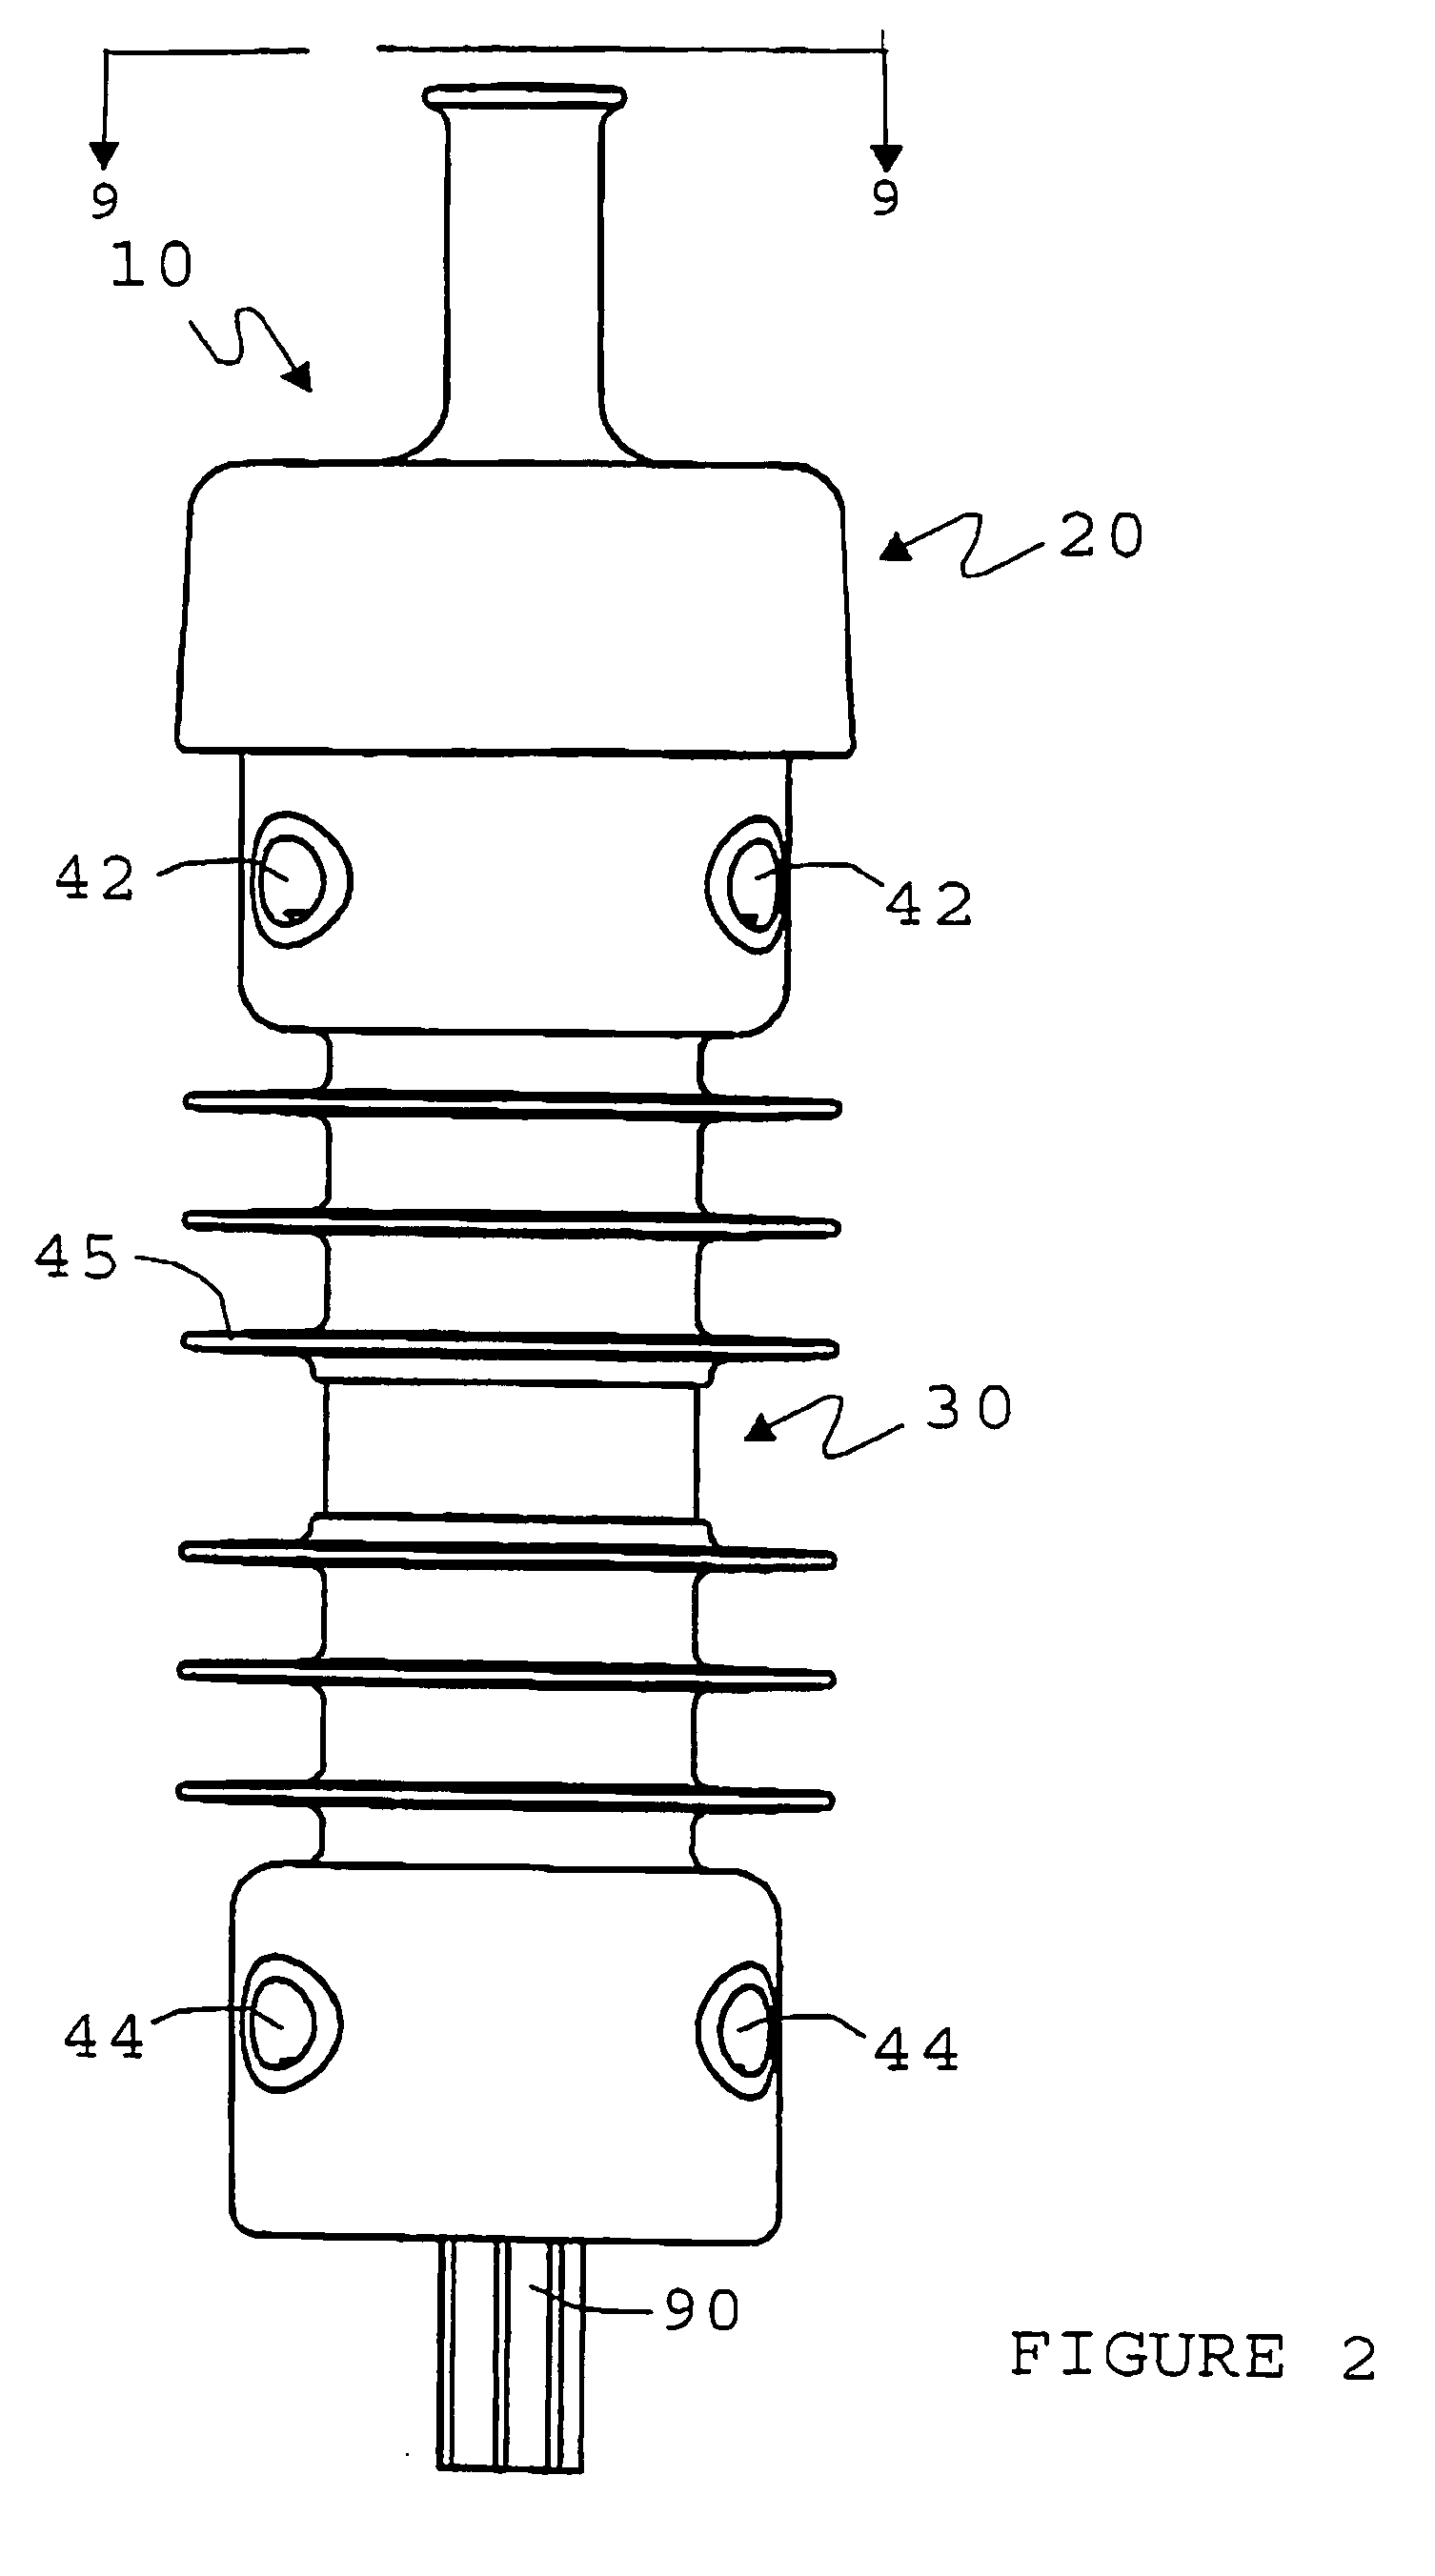 Enclosed Insulator Assembly for High-Voltage Distribution Systems